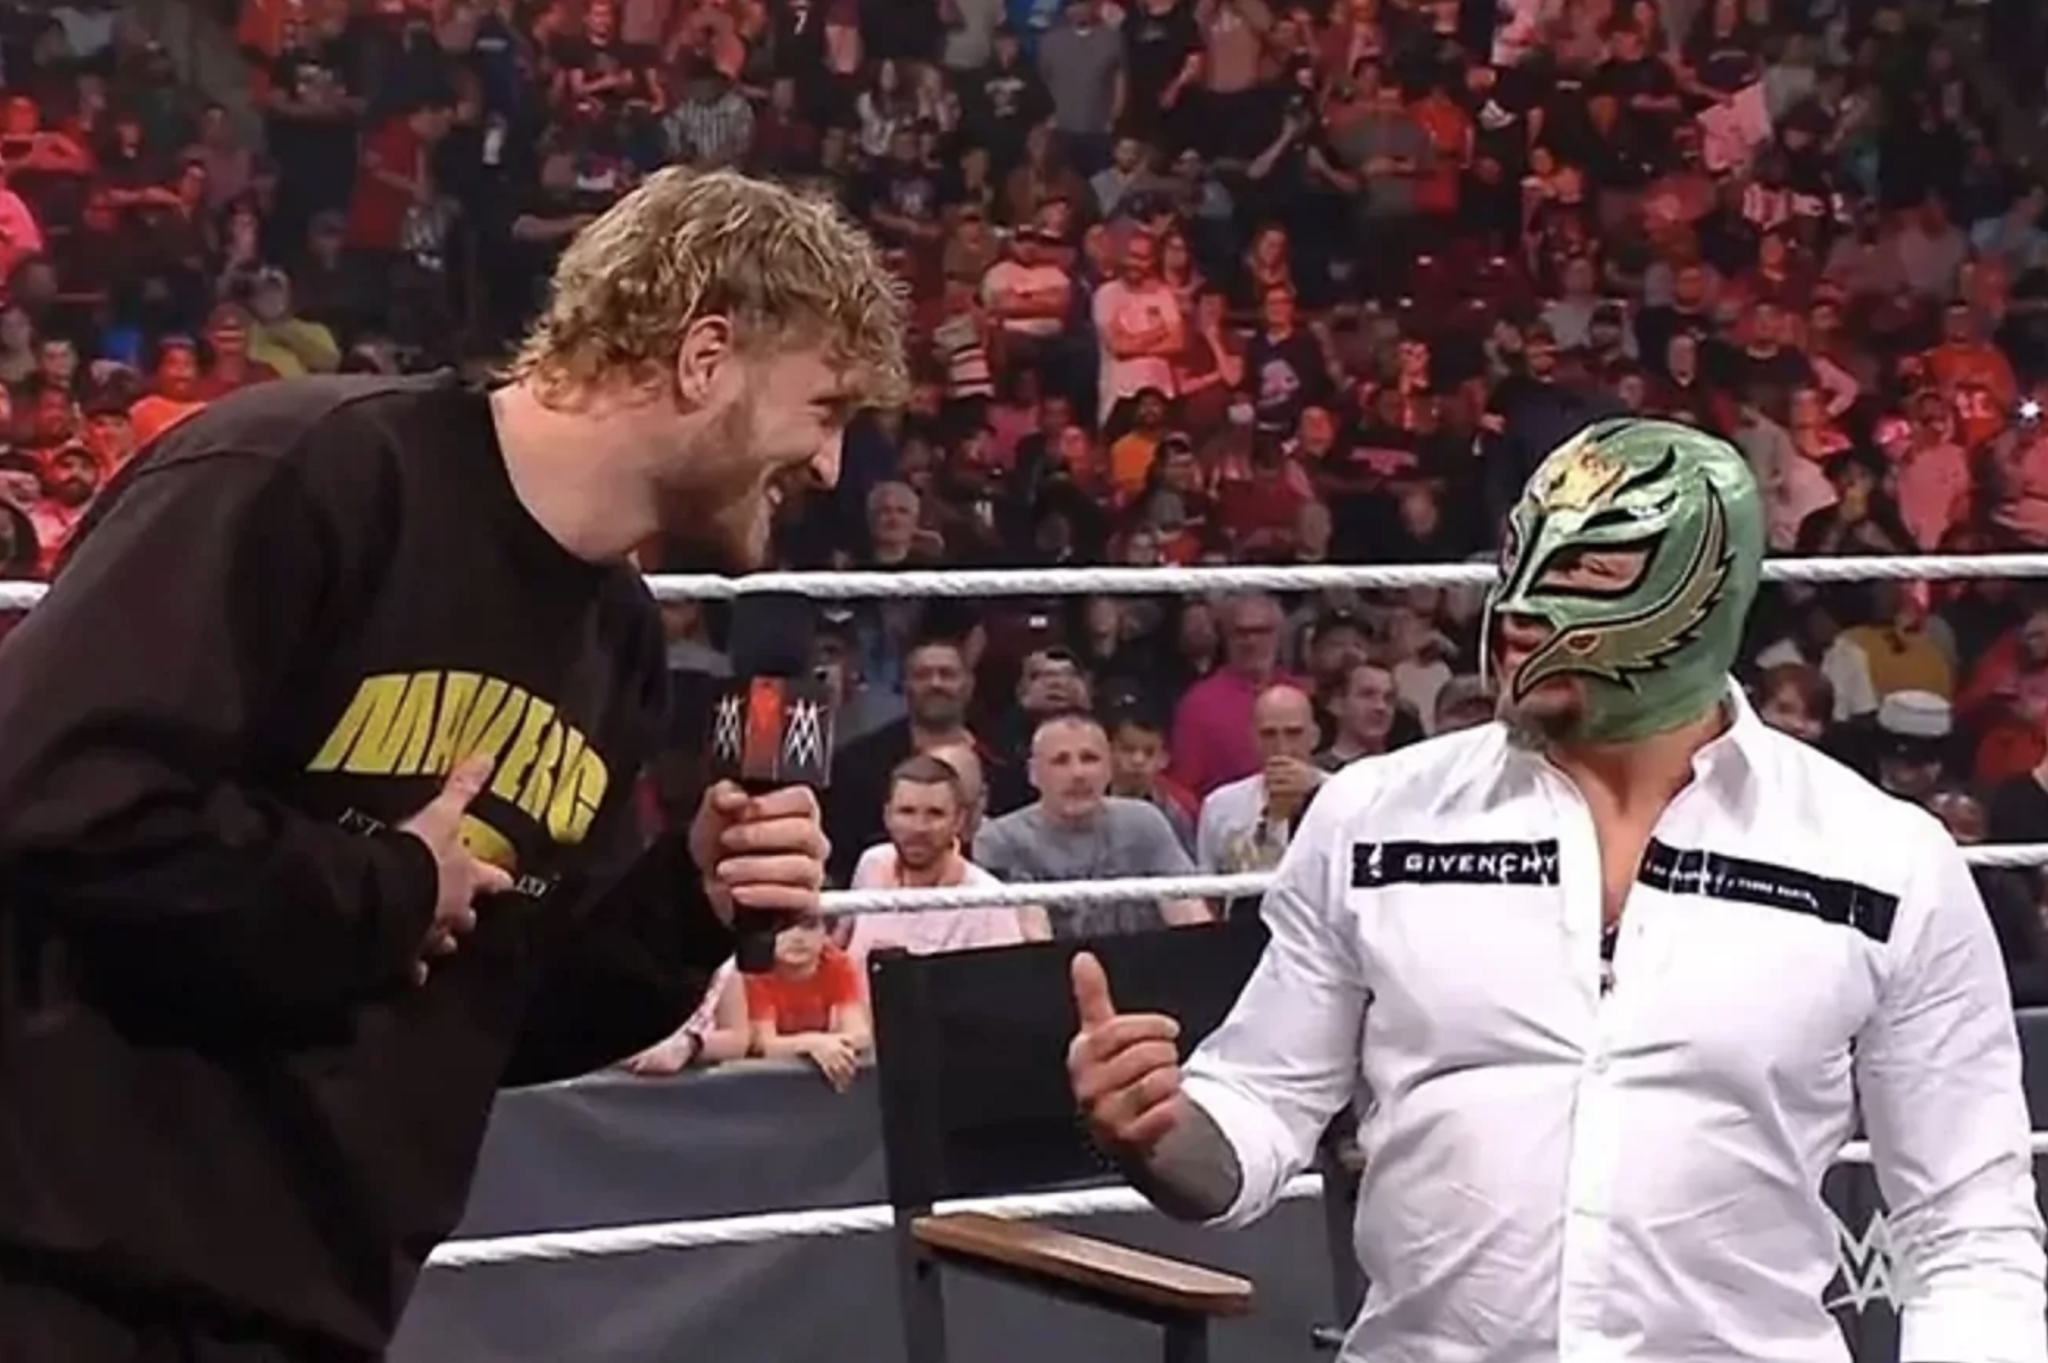 Rey Mysterio accepts Logan Paul's challenge and will meet him face-to-face on SmackDown